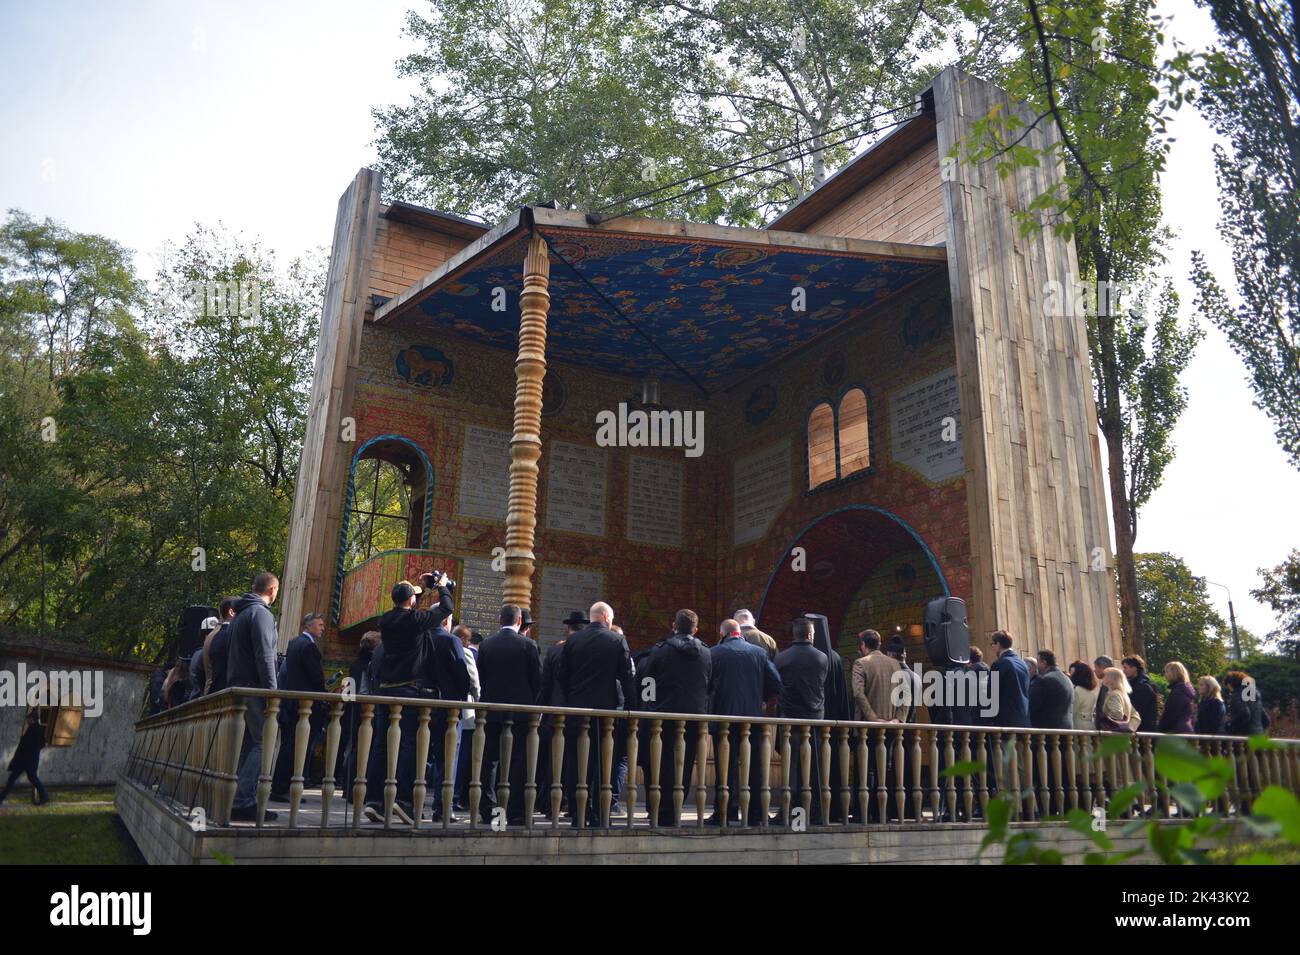 KYIV, UKRAINE - SEPTEMBER 29, 2022 - Participants of a joint interreligious prayer dedicated to the Day of Remembrance of the Babyn Yar Victims are seen at the symbolic Place for Reflection synagogue on the territory of the Babyn Yar National Historical and Memorial Reserve, Kyiv, capital of Ukraine. Stock Photo